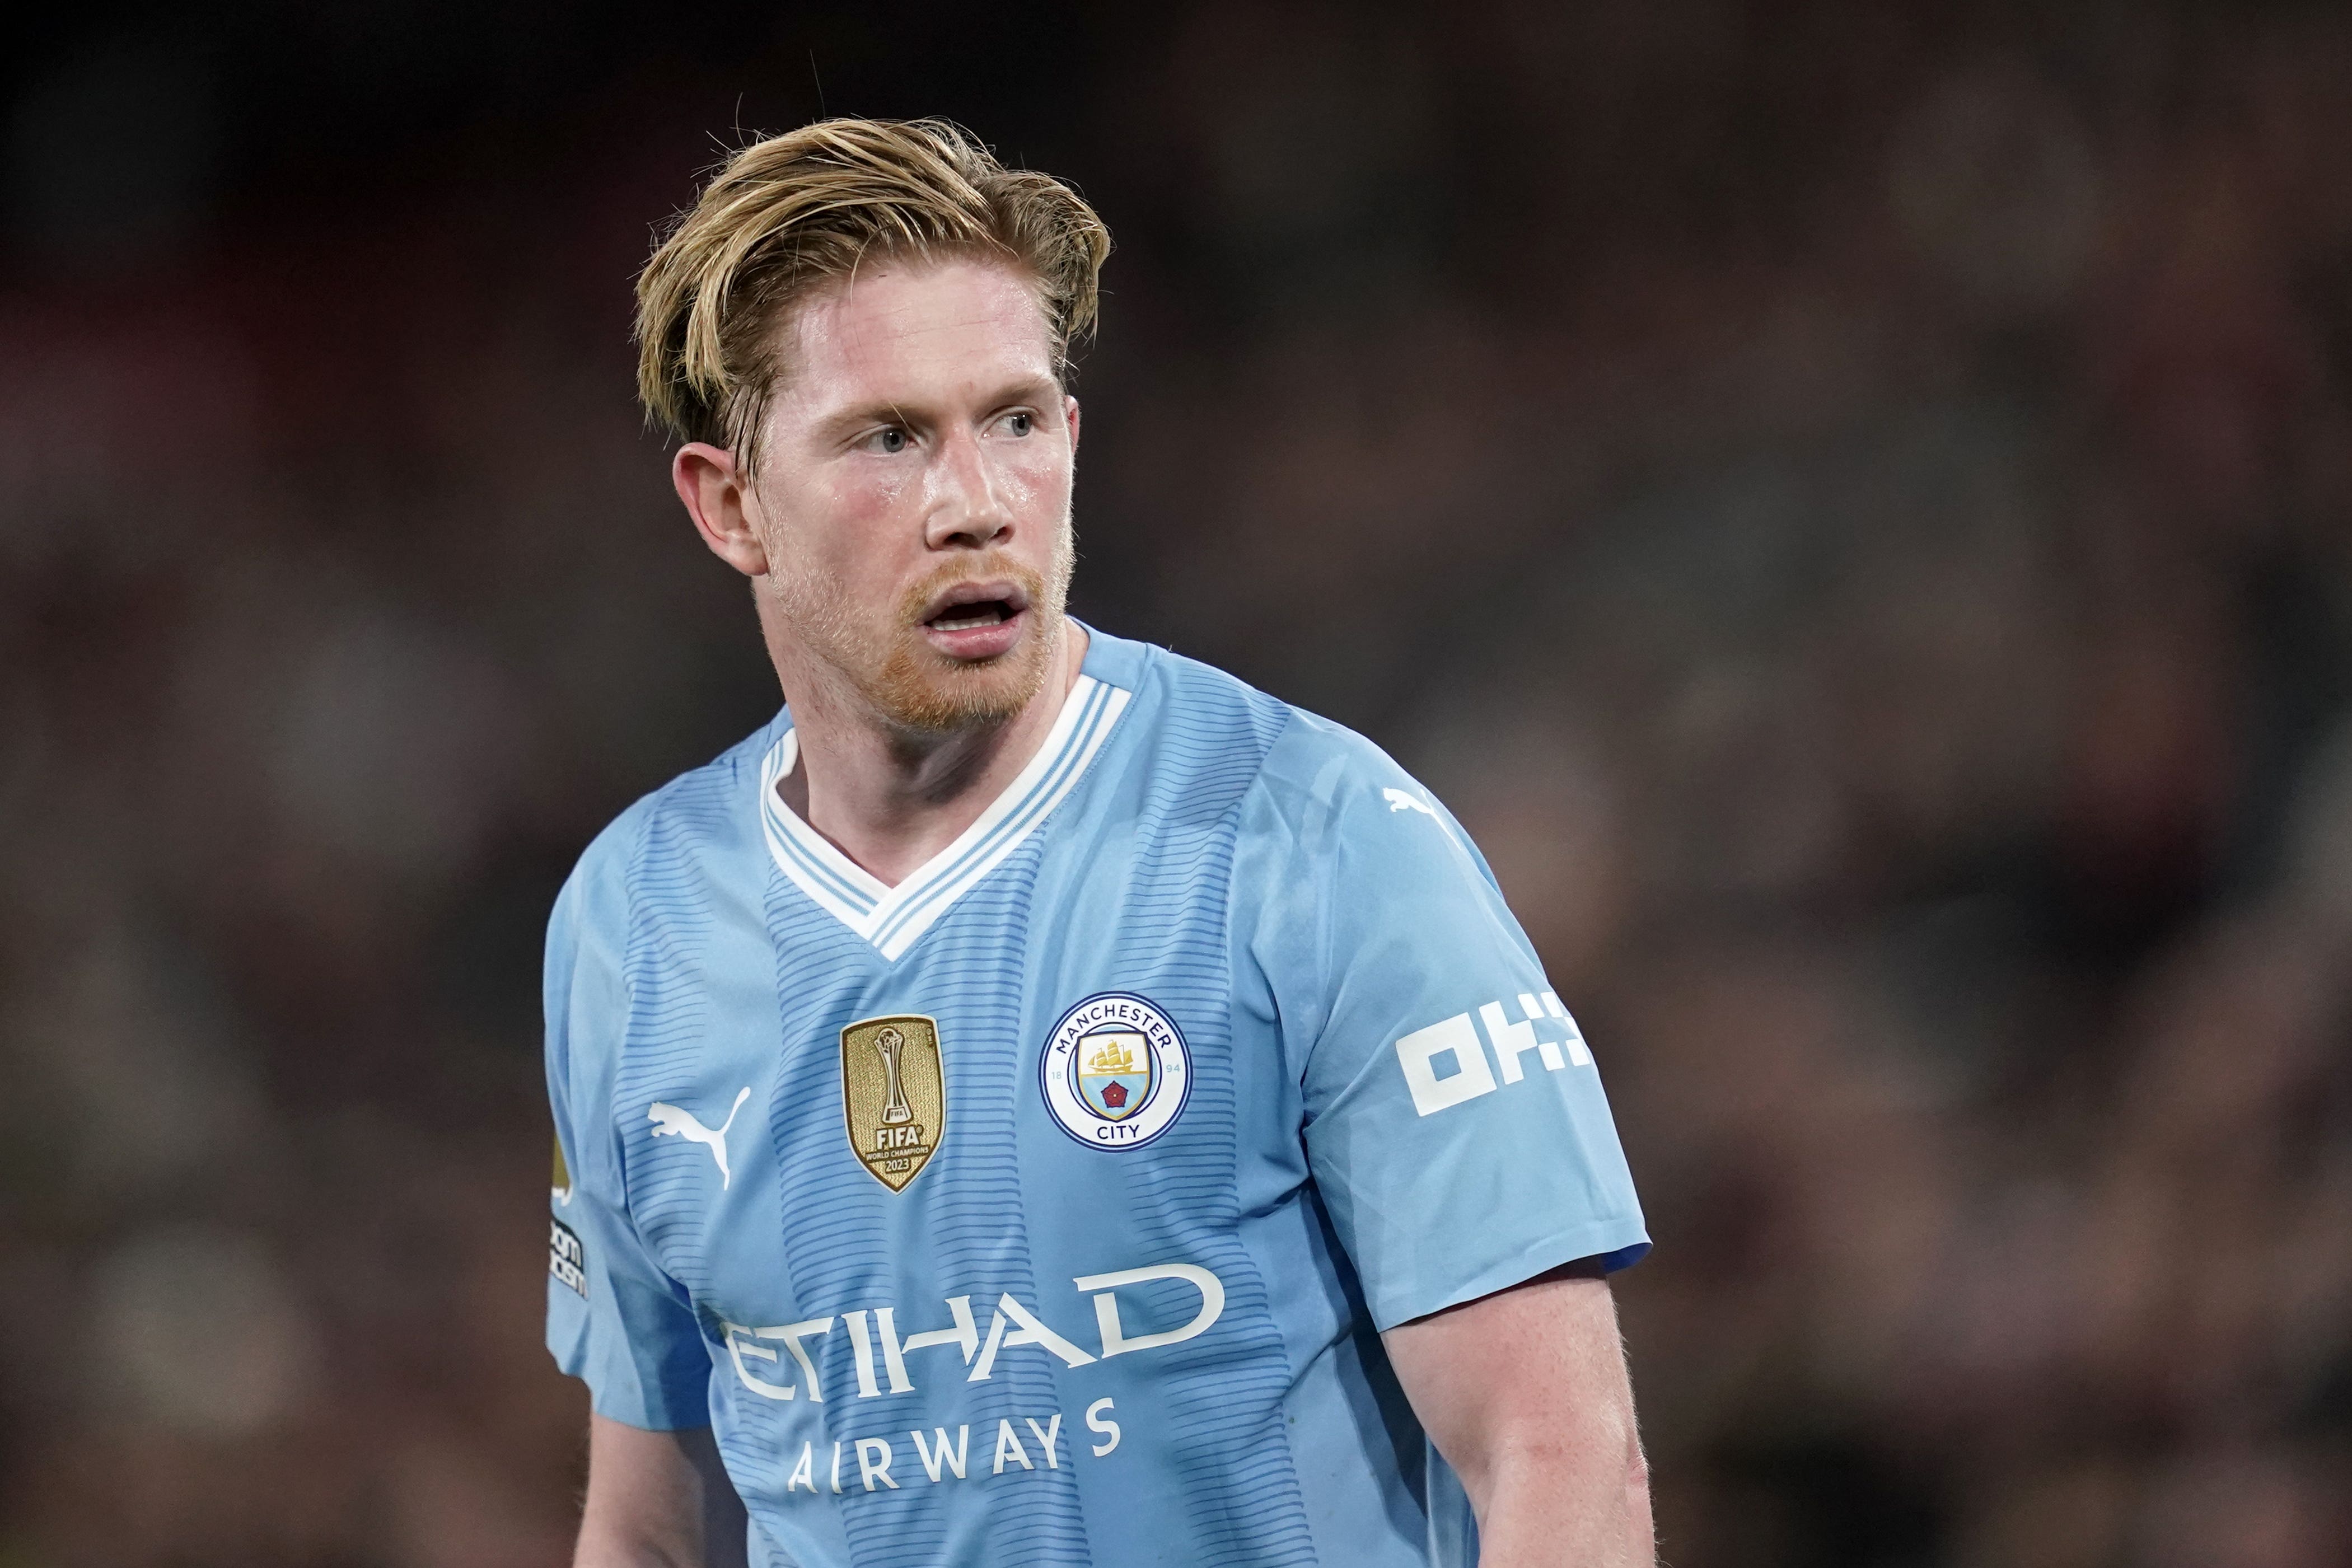 Kevin De Bruyne has admitted he is open to a move to Saudi Arabia